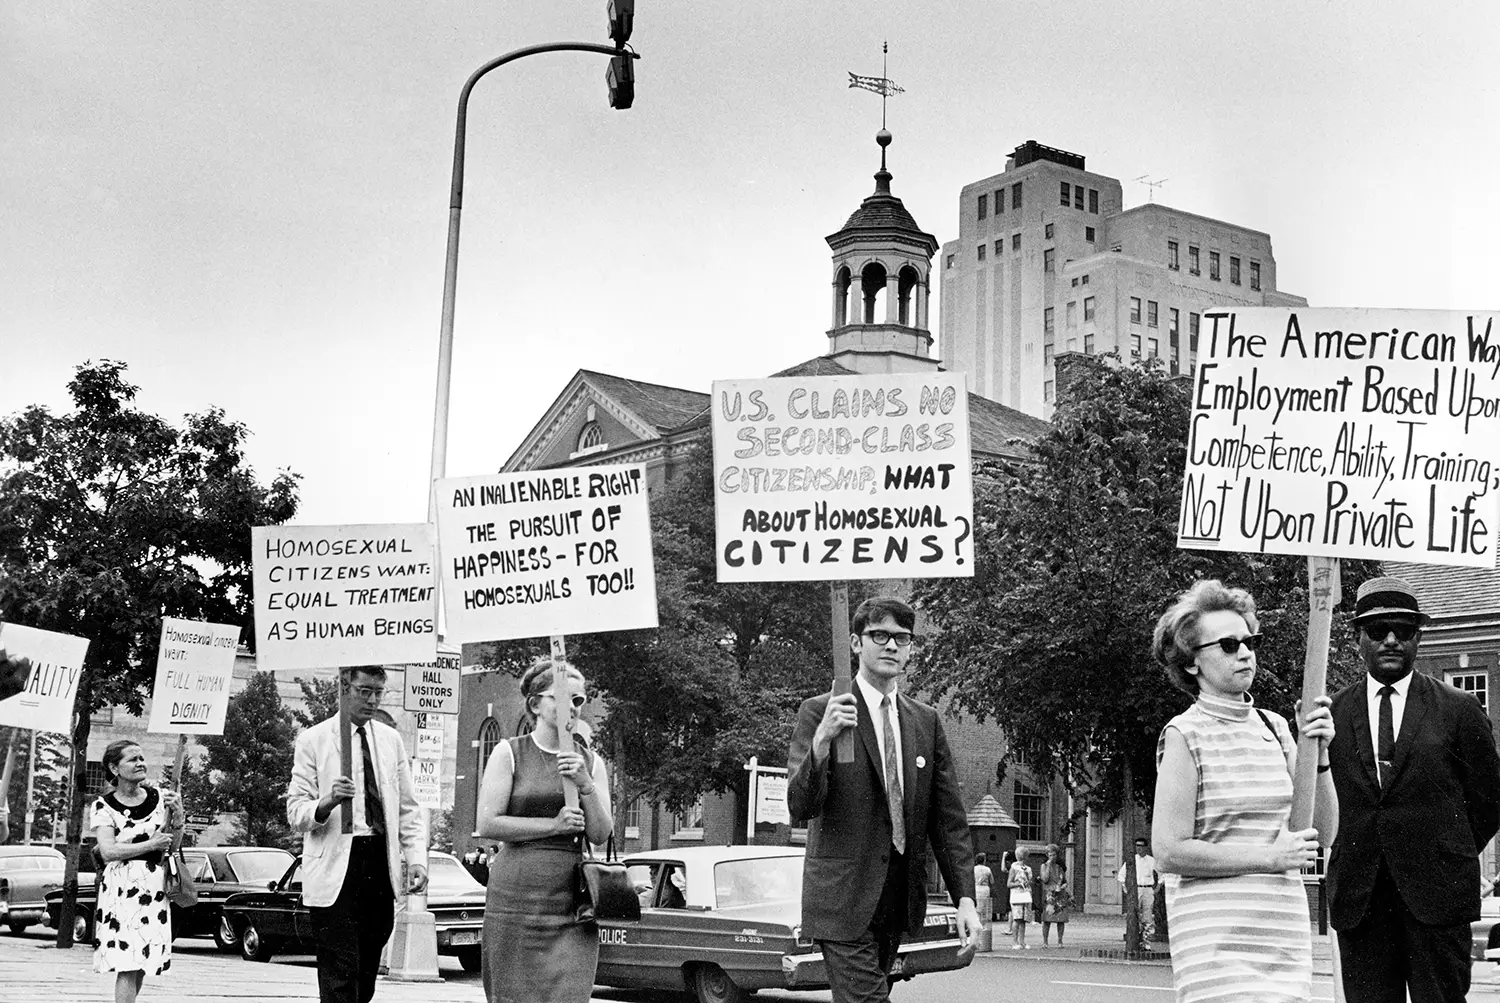 A group of protesters march with signs containing statements such as “U.S. claims no second-class citizenship. What about homosexual citizens?” and “The American Way: Employment based upon competence, ability, training; not upon private life” and “an inalienable right the pursuit of happiness - for homosexuals too!!” and “homosexual citizens want equal treatment as human beings.”